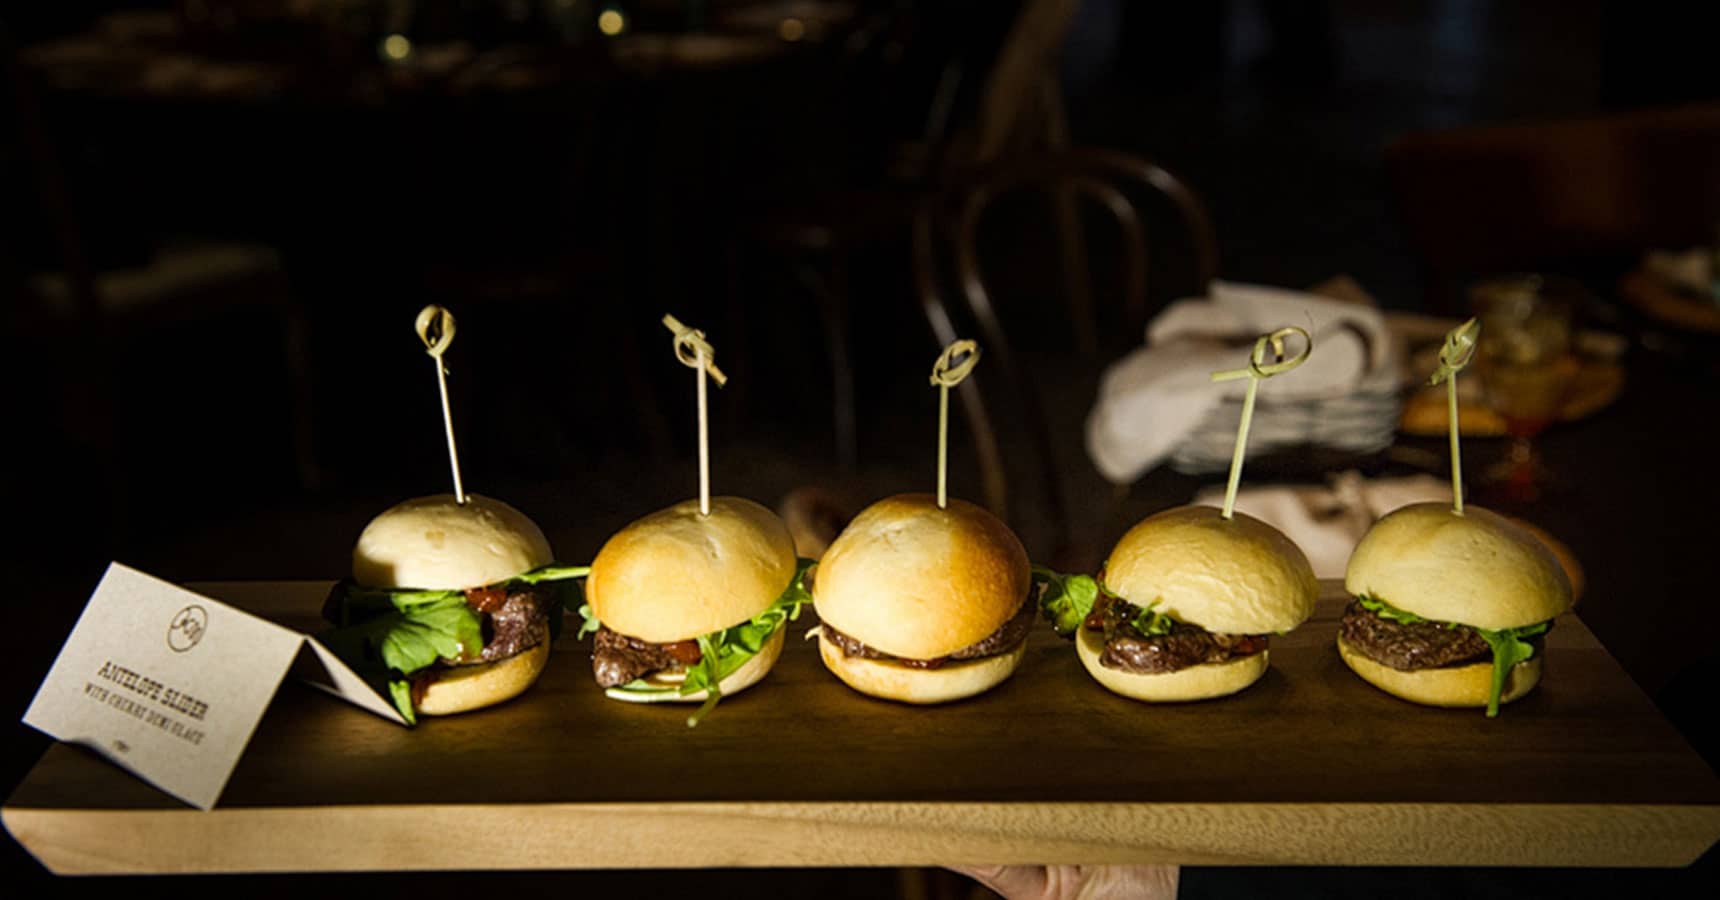 Antelope sliders by Crave Catering